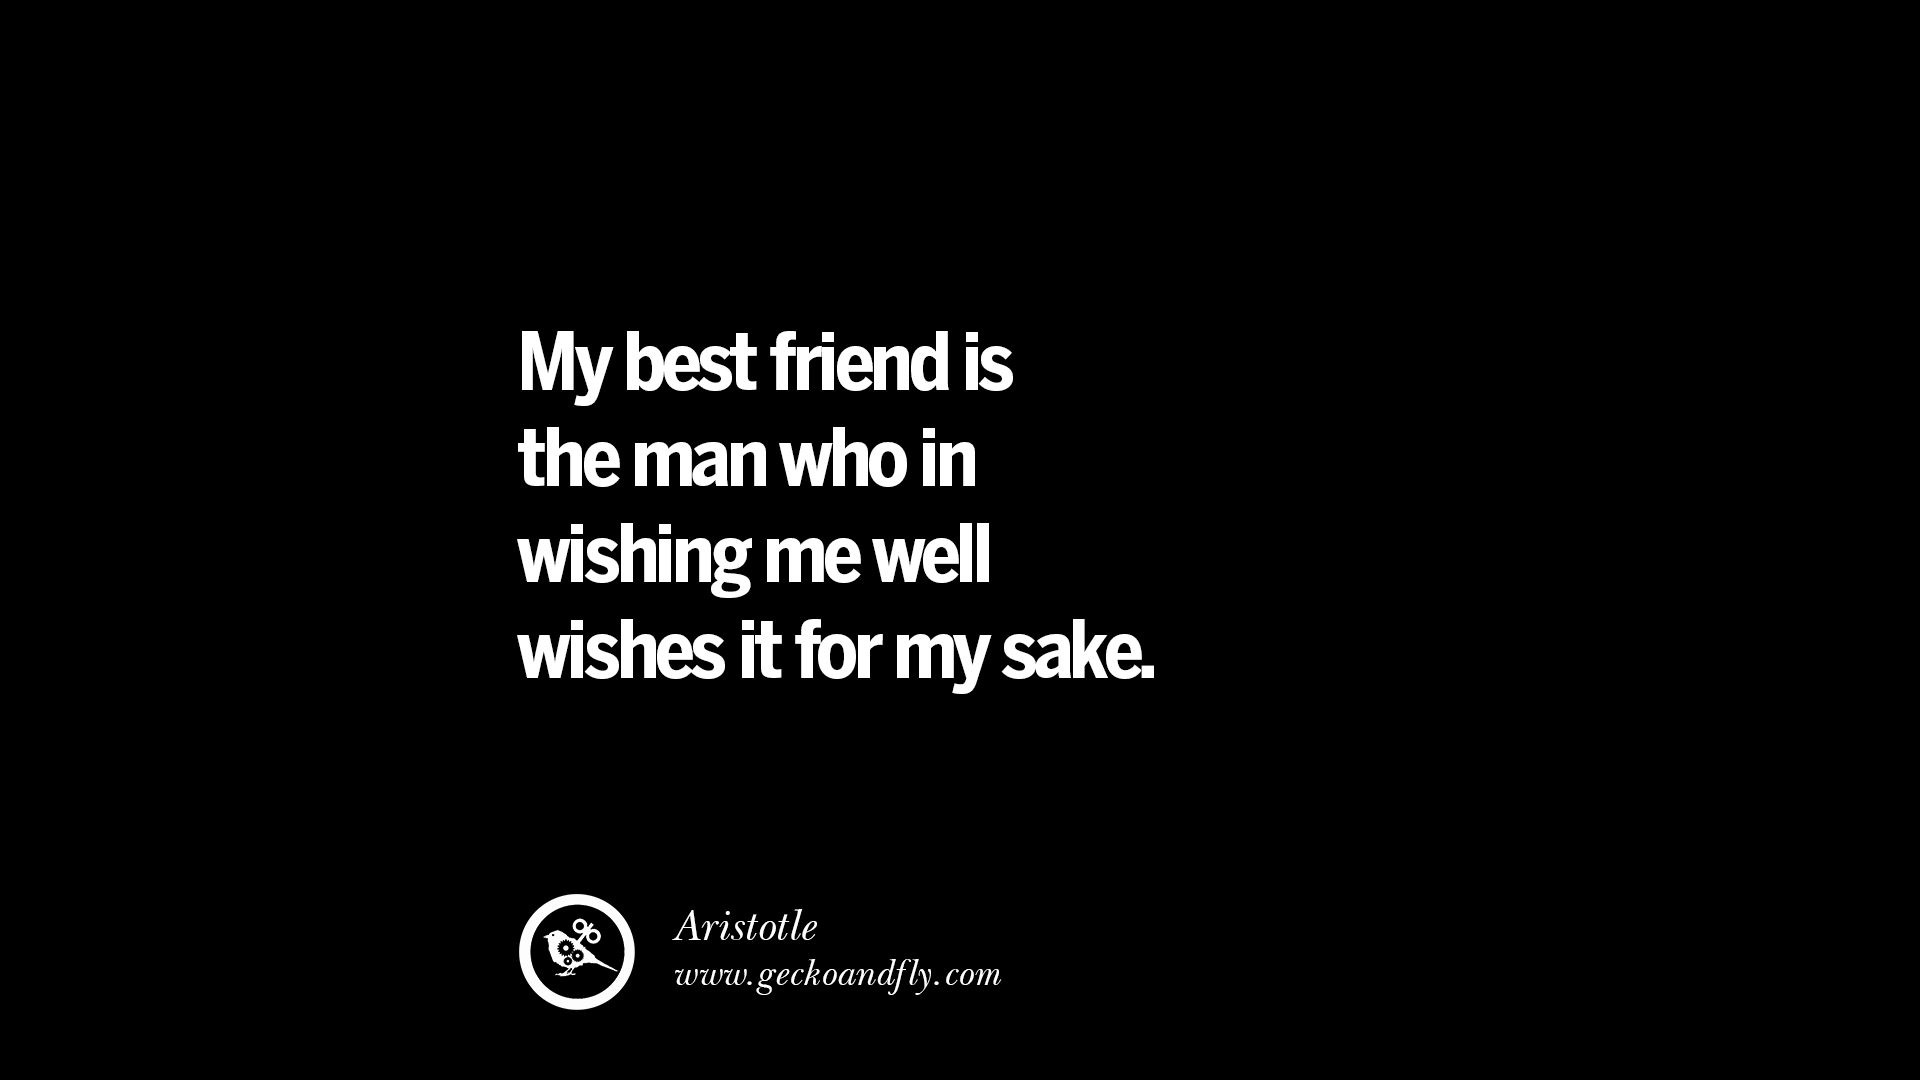 Friendship Relationship Quotes
 20 Amazing Quotes About Friendship Love and Friends